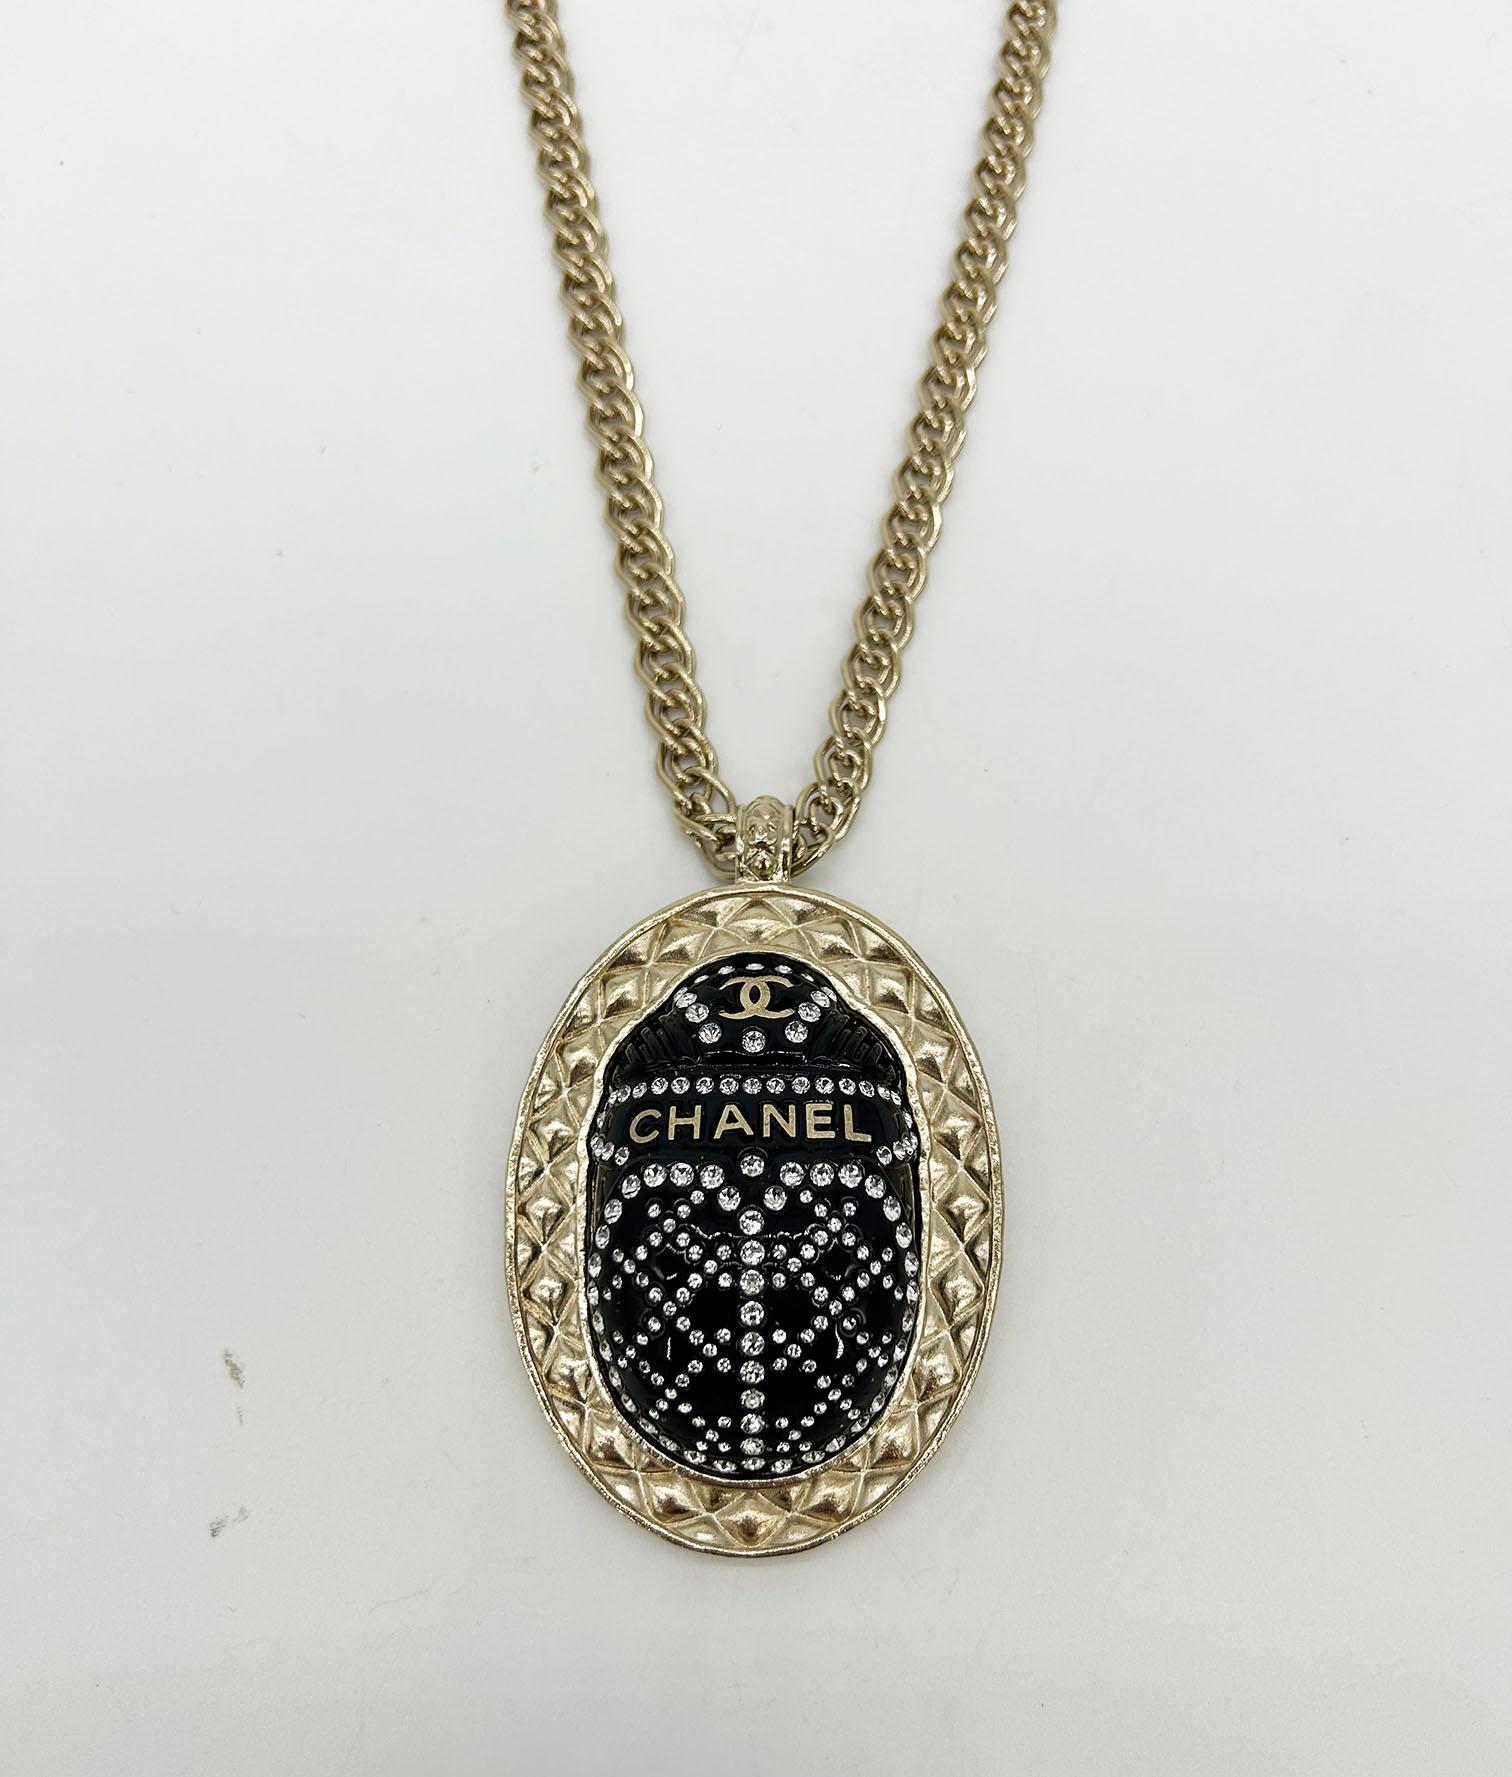 Chanel Black Rhinestone Egyptian Scarab Necklace in like new condition. from fall/winter 2019 collection with gold chain necklace and 2x2.75